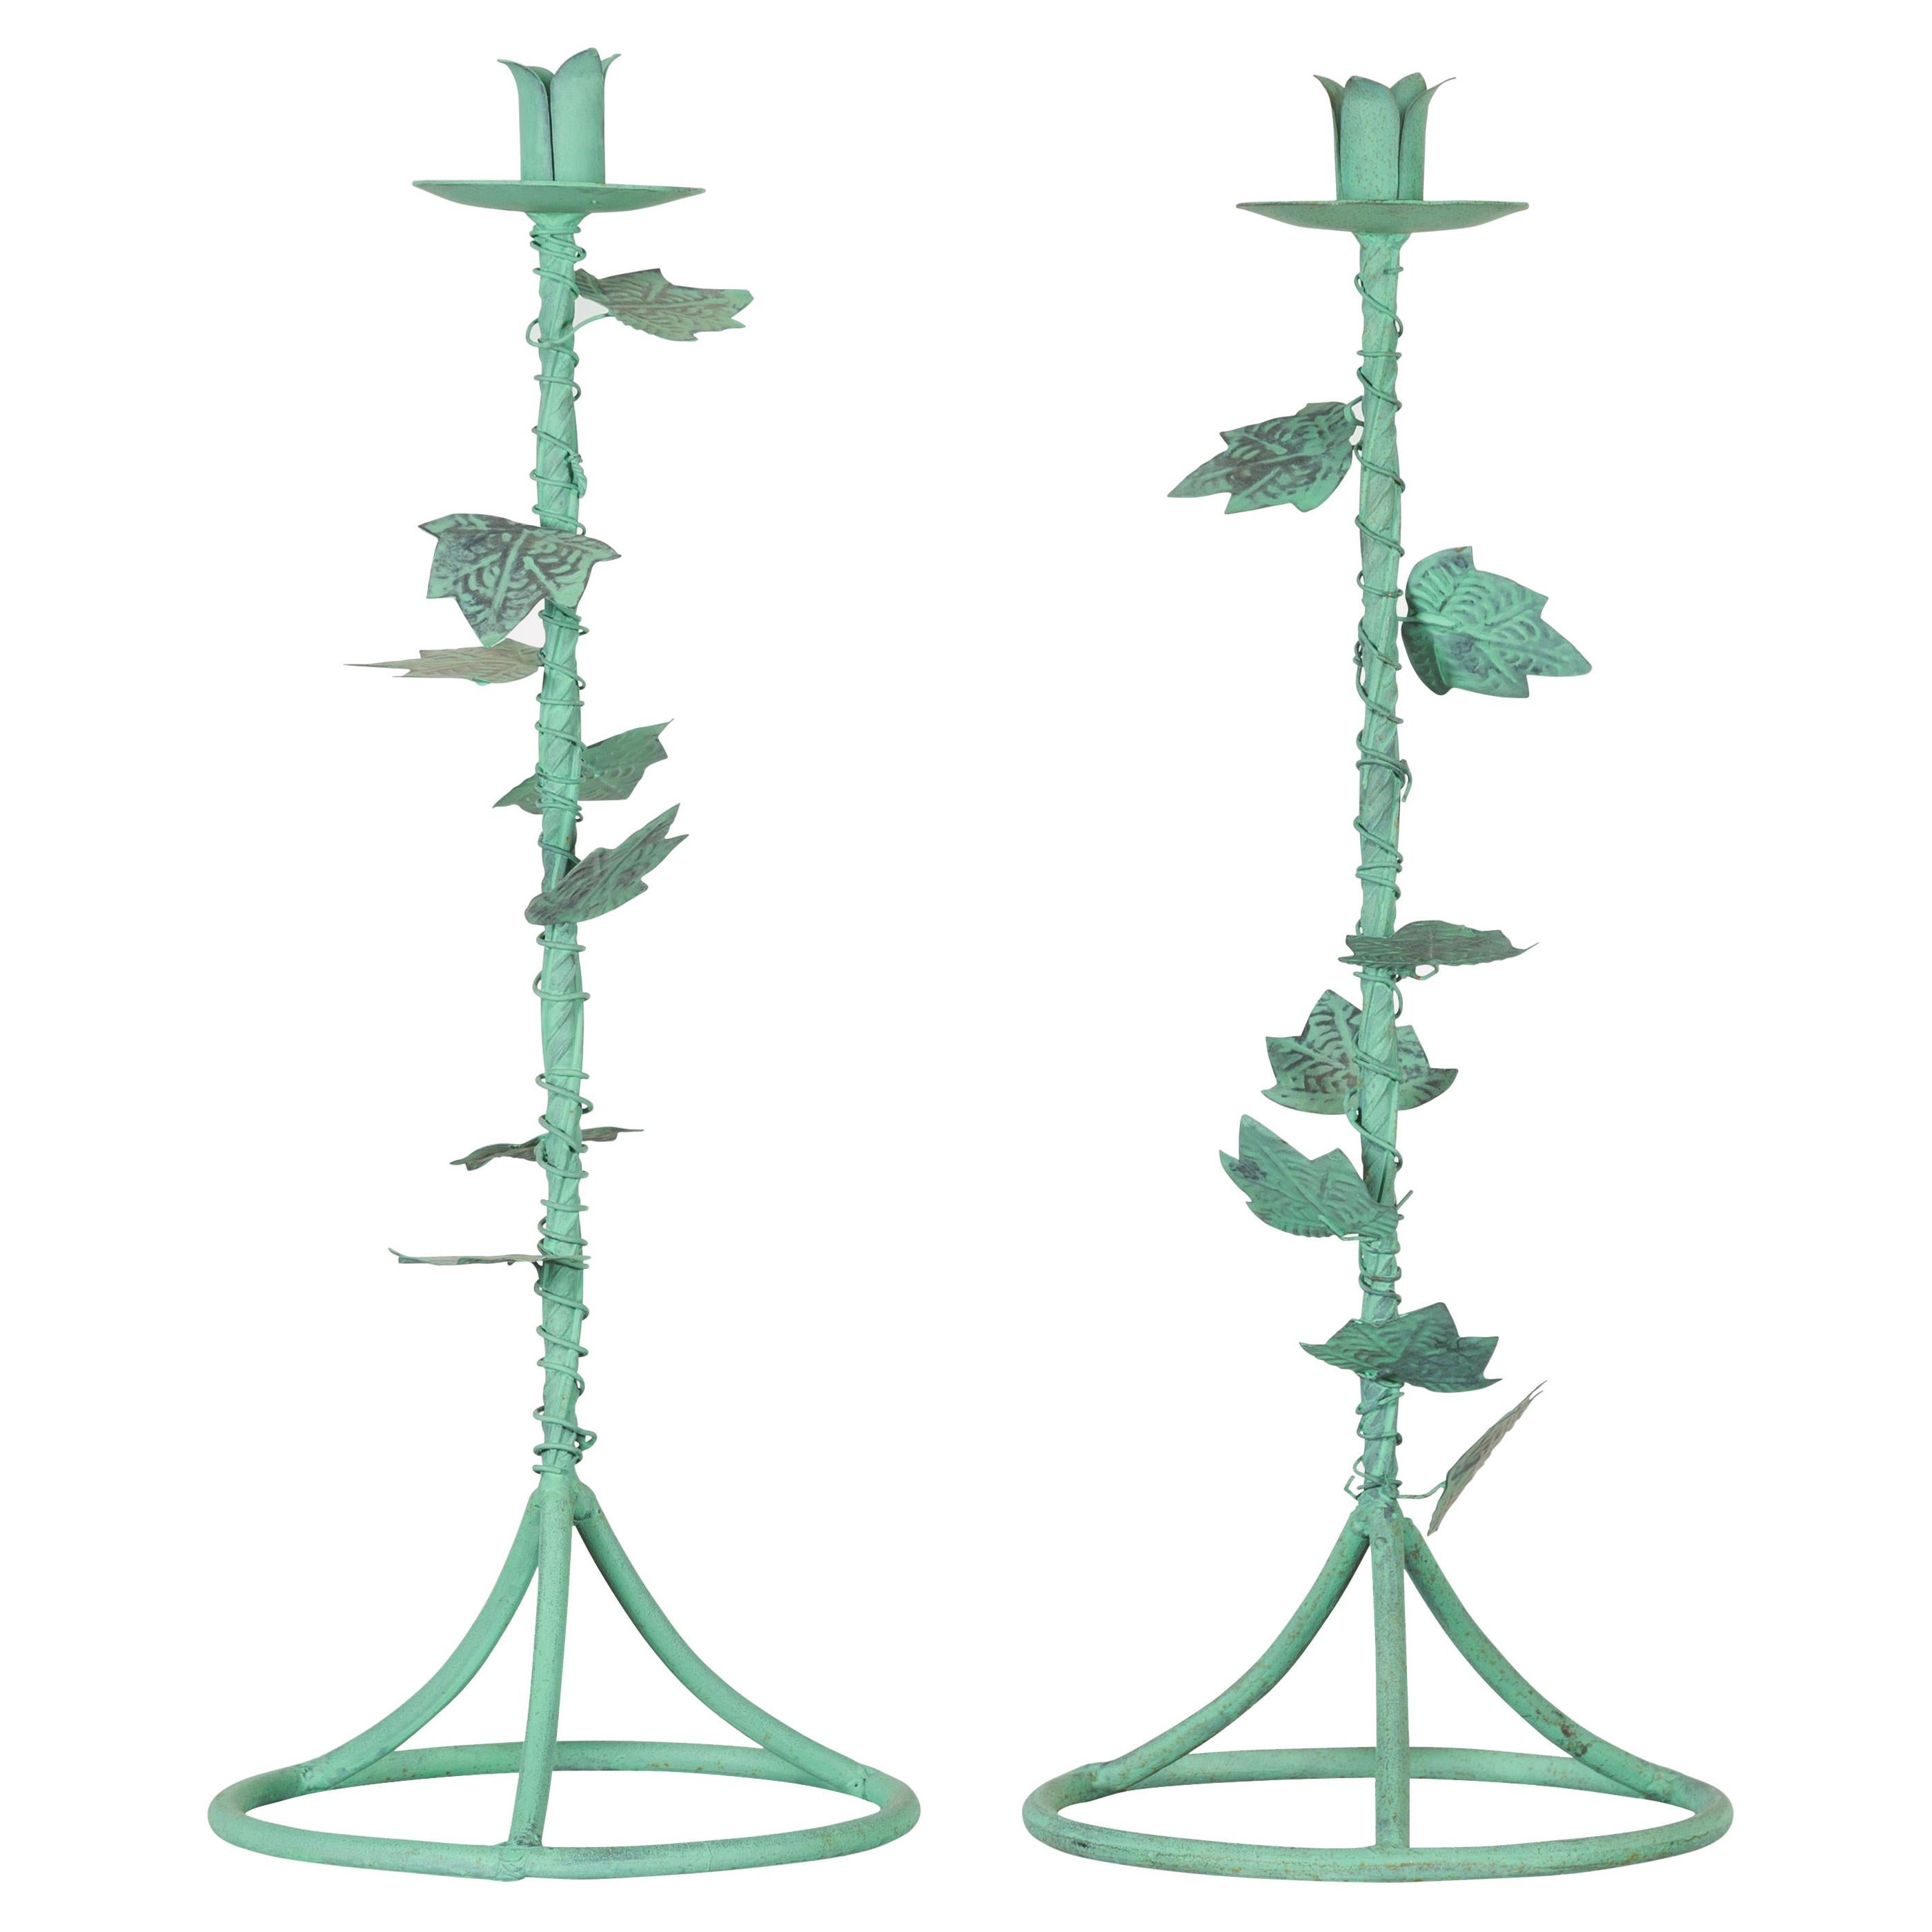 Pair of Indian Vintage Brass Candlesticks with Ivy Motifs and Verde Patina